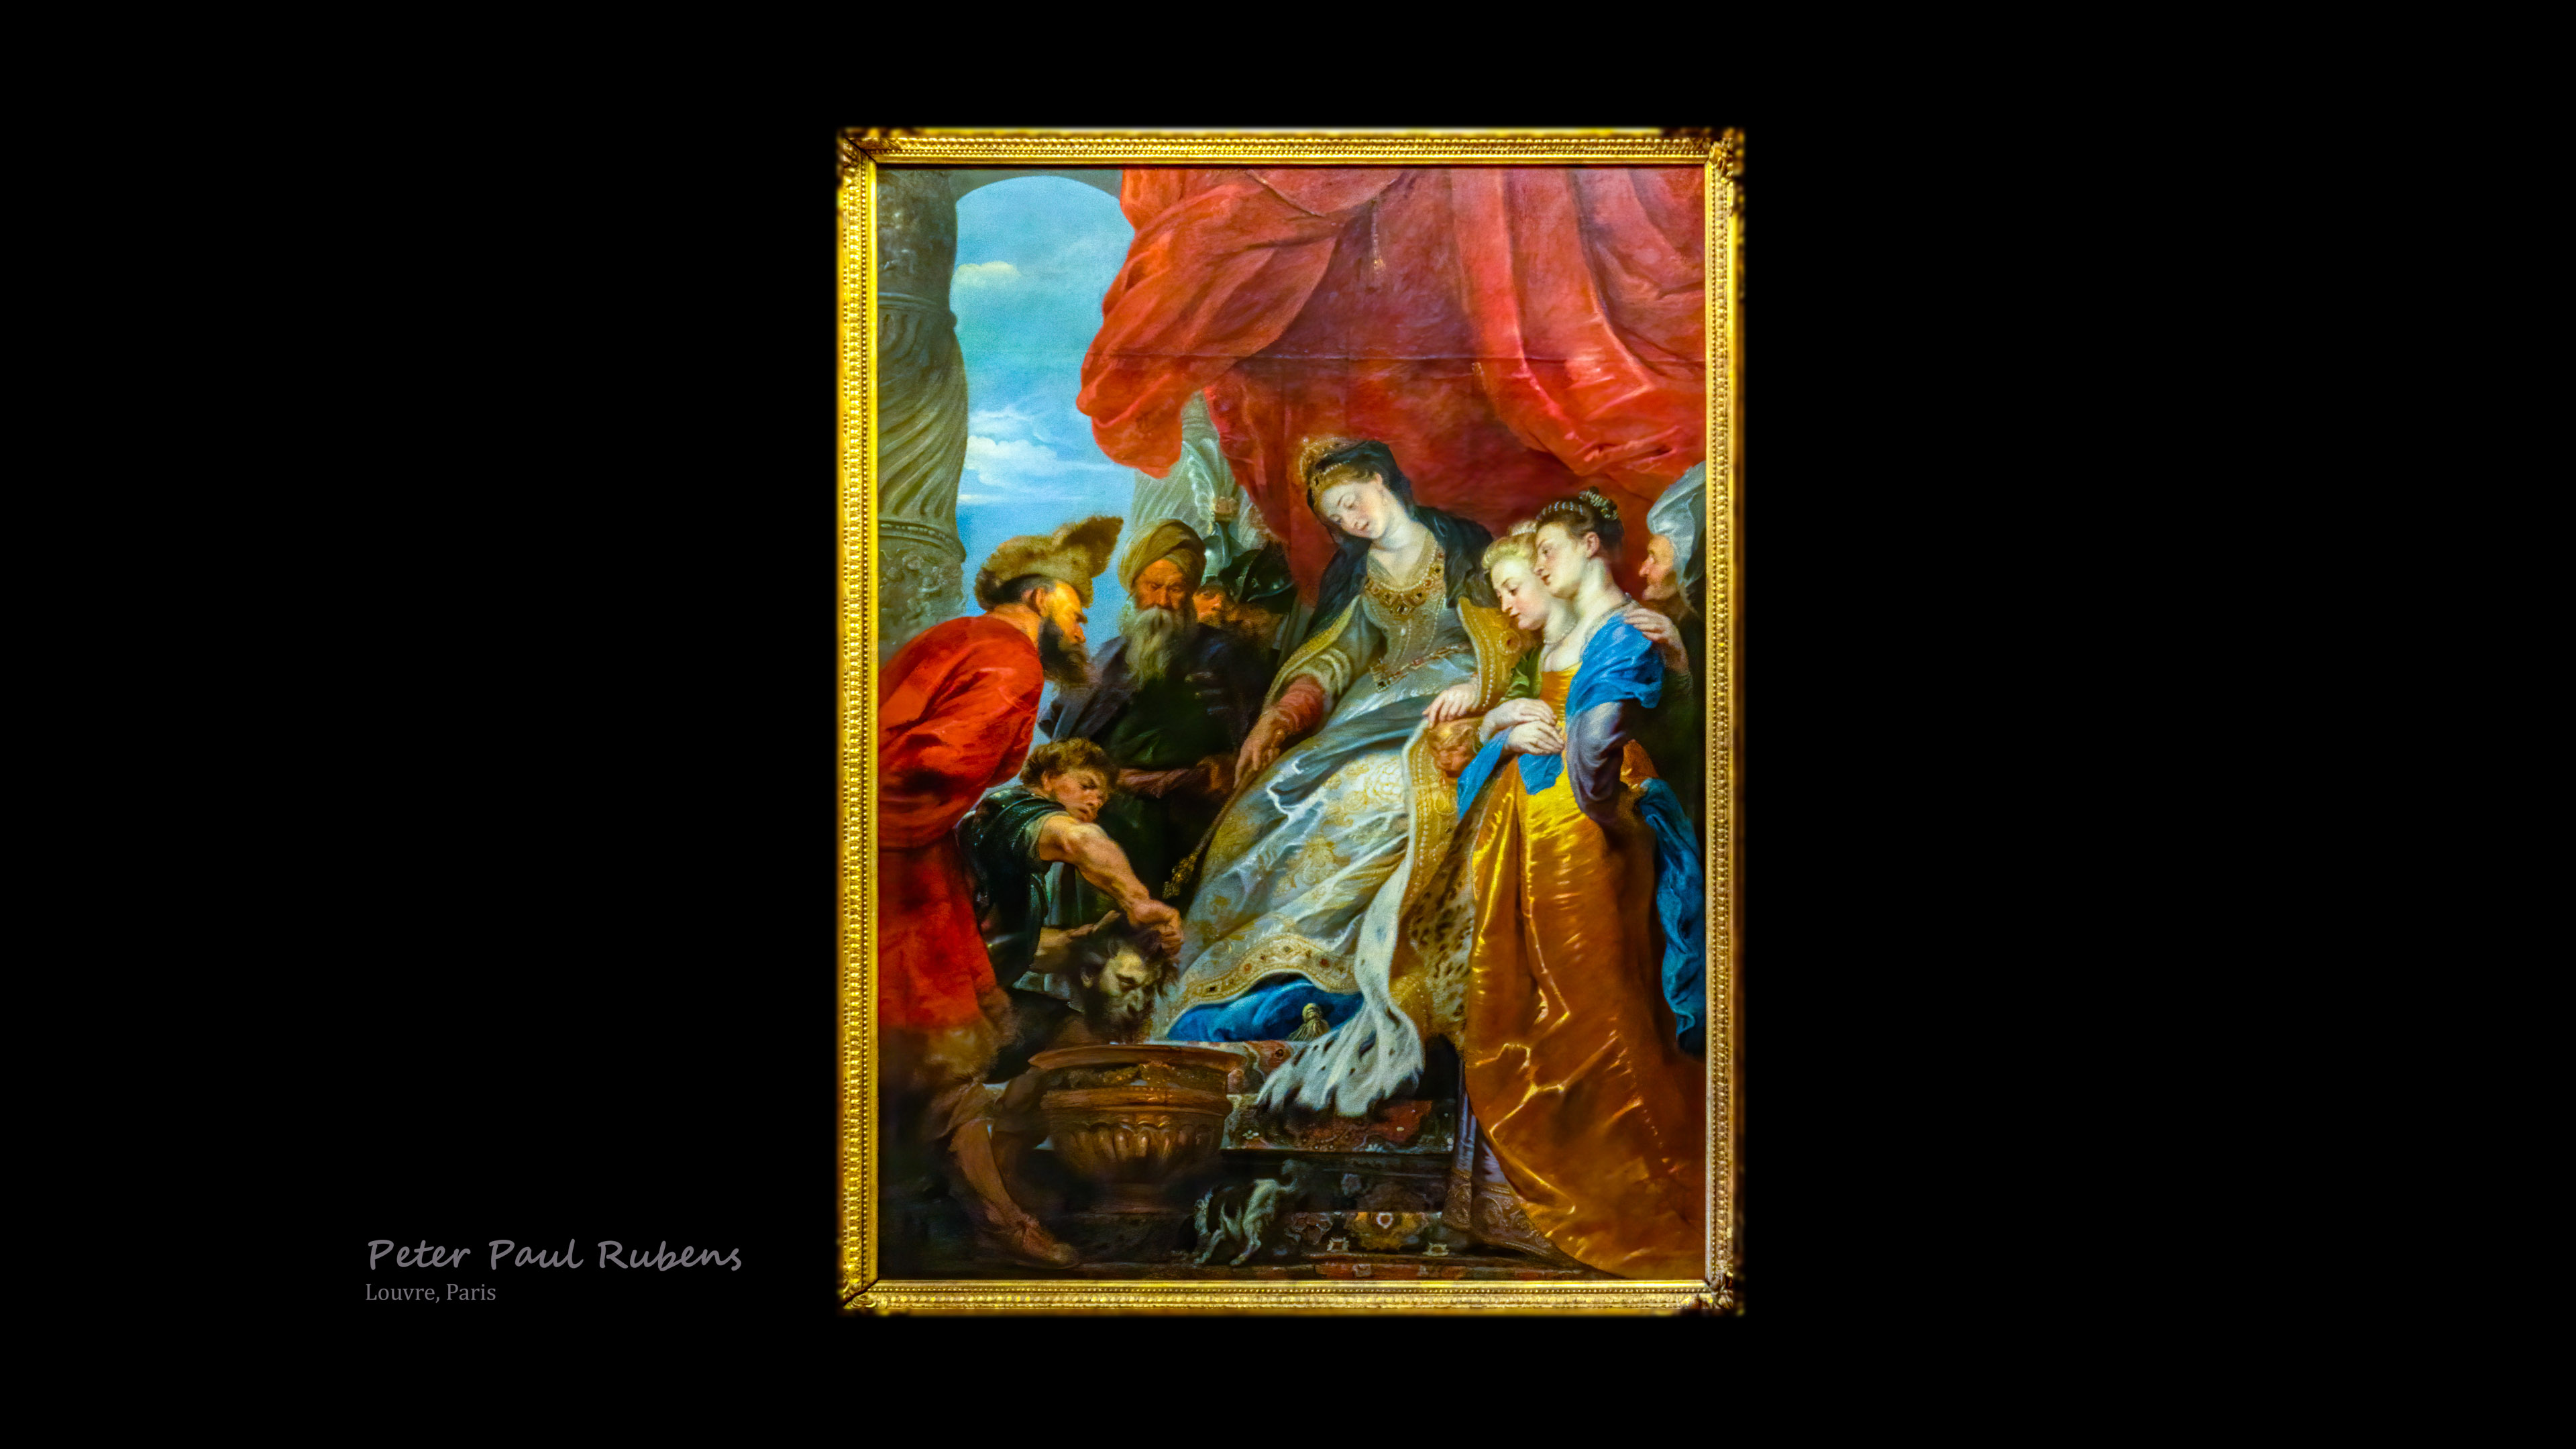 Adorn your laptop with the richness of Rubens' masterpieces with our high-resolution wallpapers.